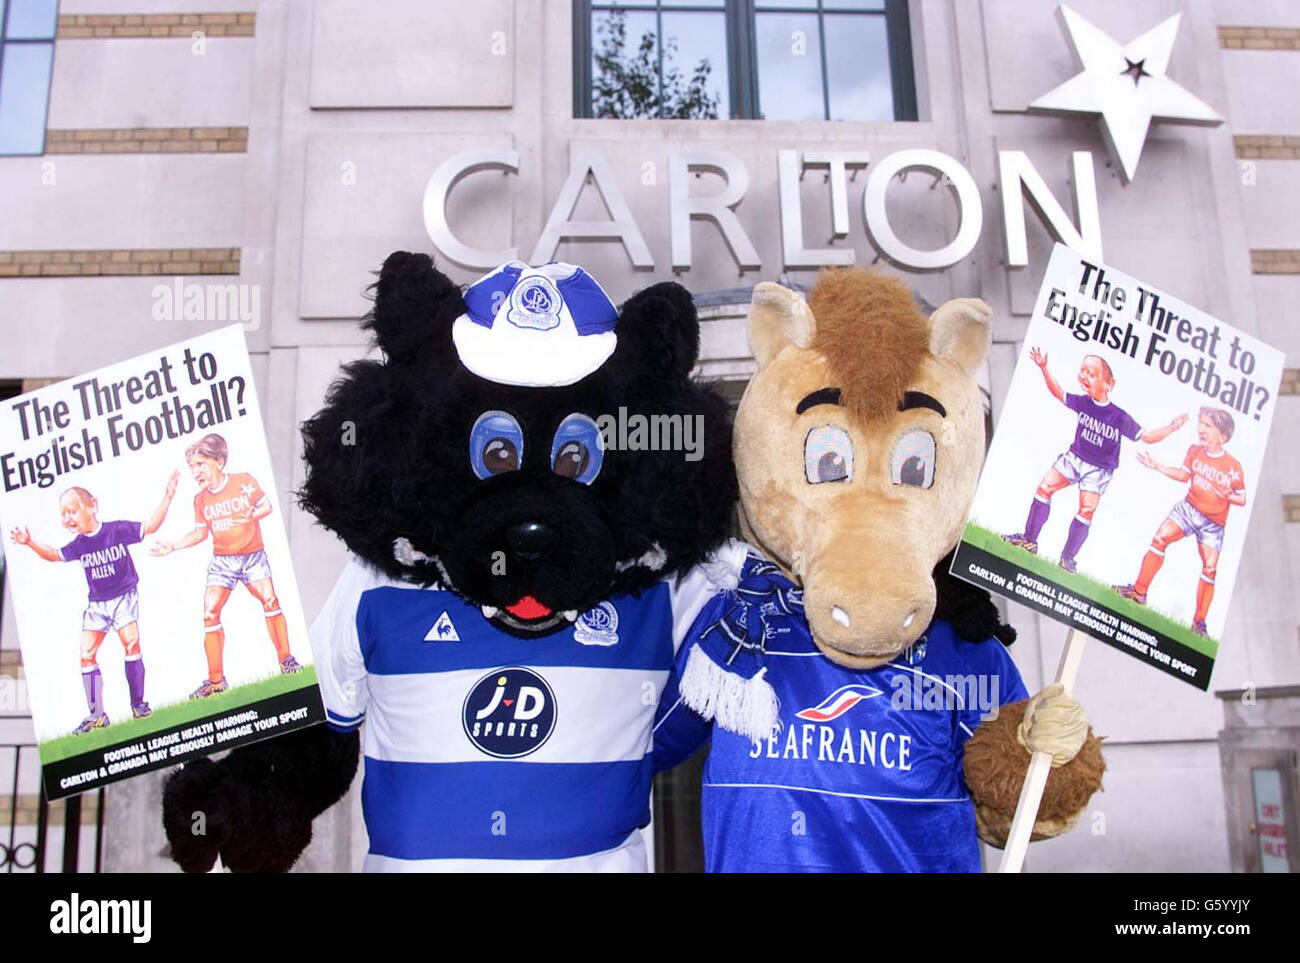 Queens Park Rangers mascot Jude the Cat (r) and Gillingham FC's mascot Tommy T outside Carlton TV headquarters in Knightsbridge, London. The mascots are protesting over the 178.5 million that was lost with the collapse of ITV Digital. Stock Photo